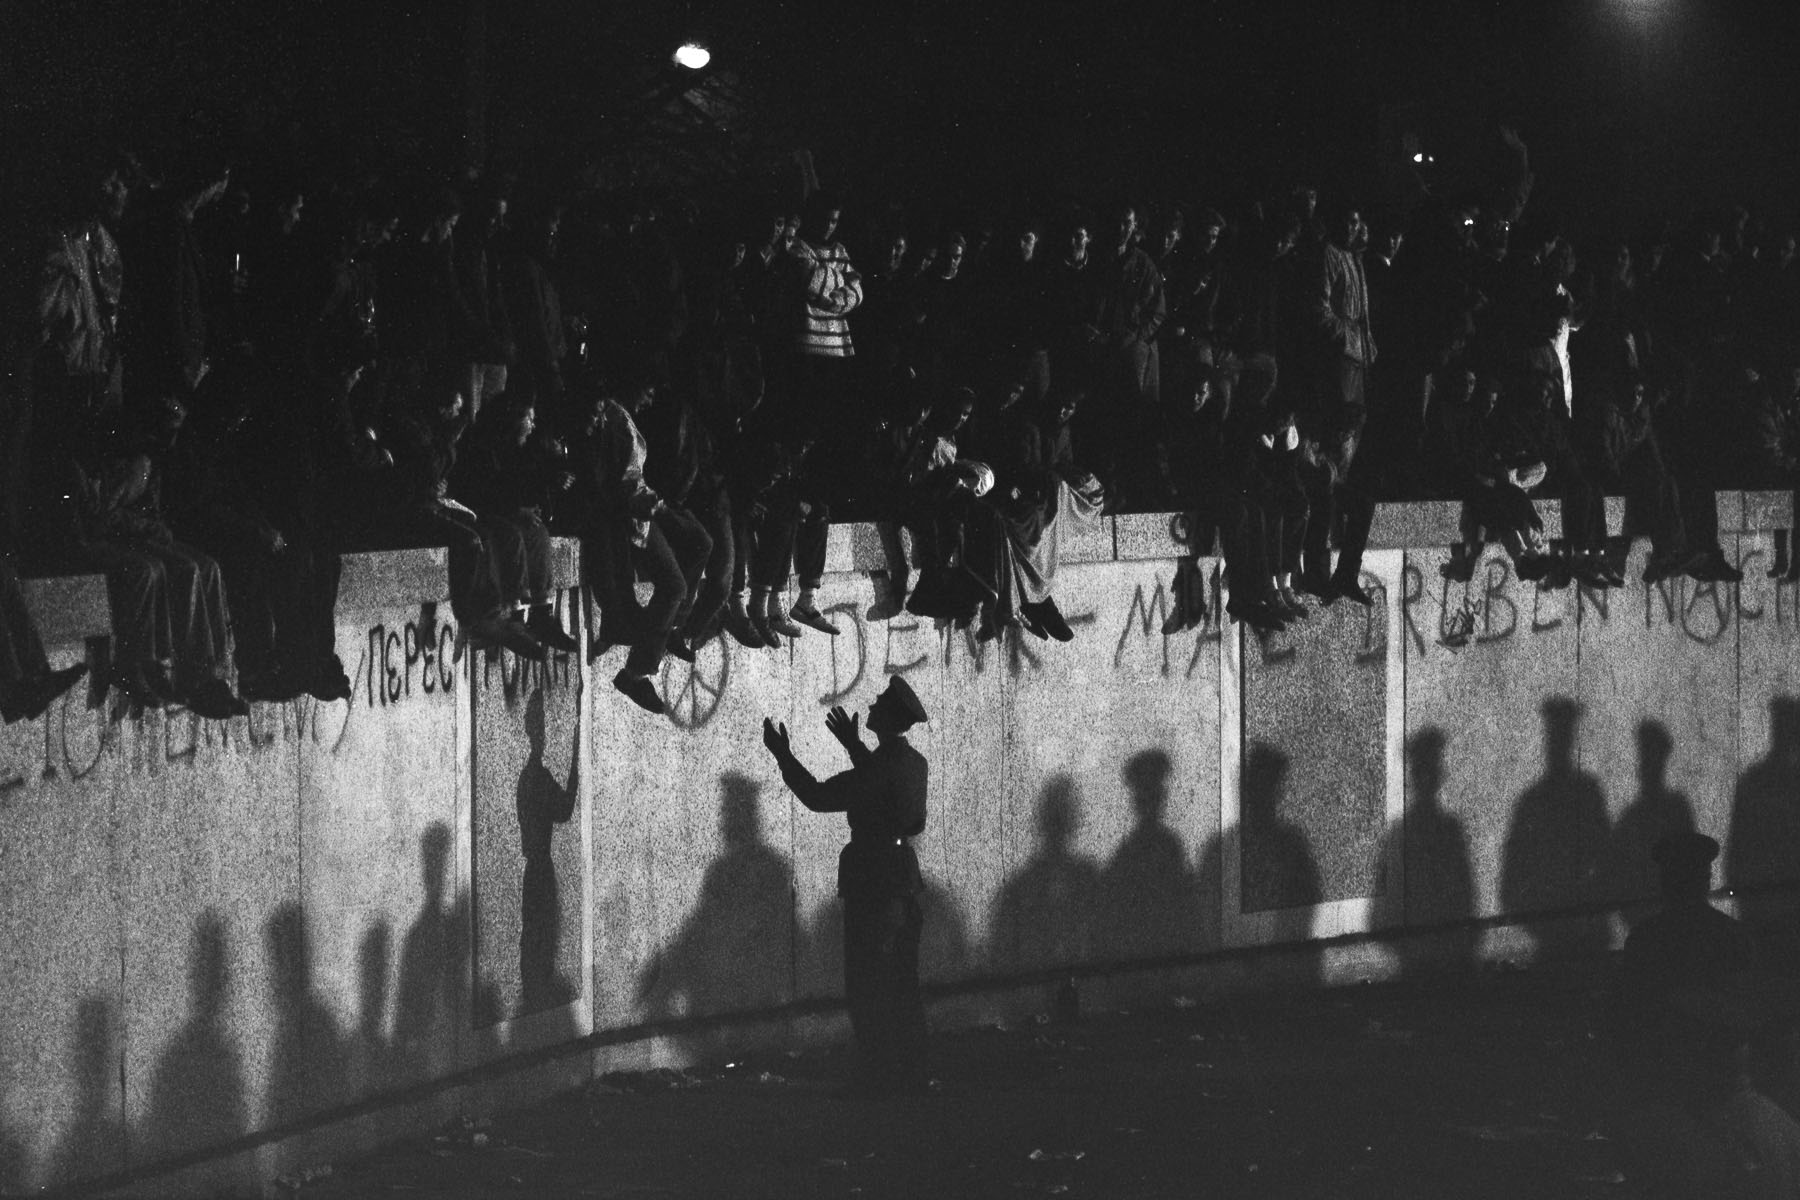 When the opening of the border is announced West-Berliners gather and climb on the wall next to the Brandenburg Gate on November 10, 1989